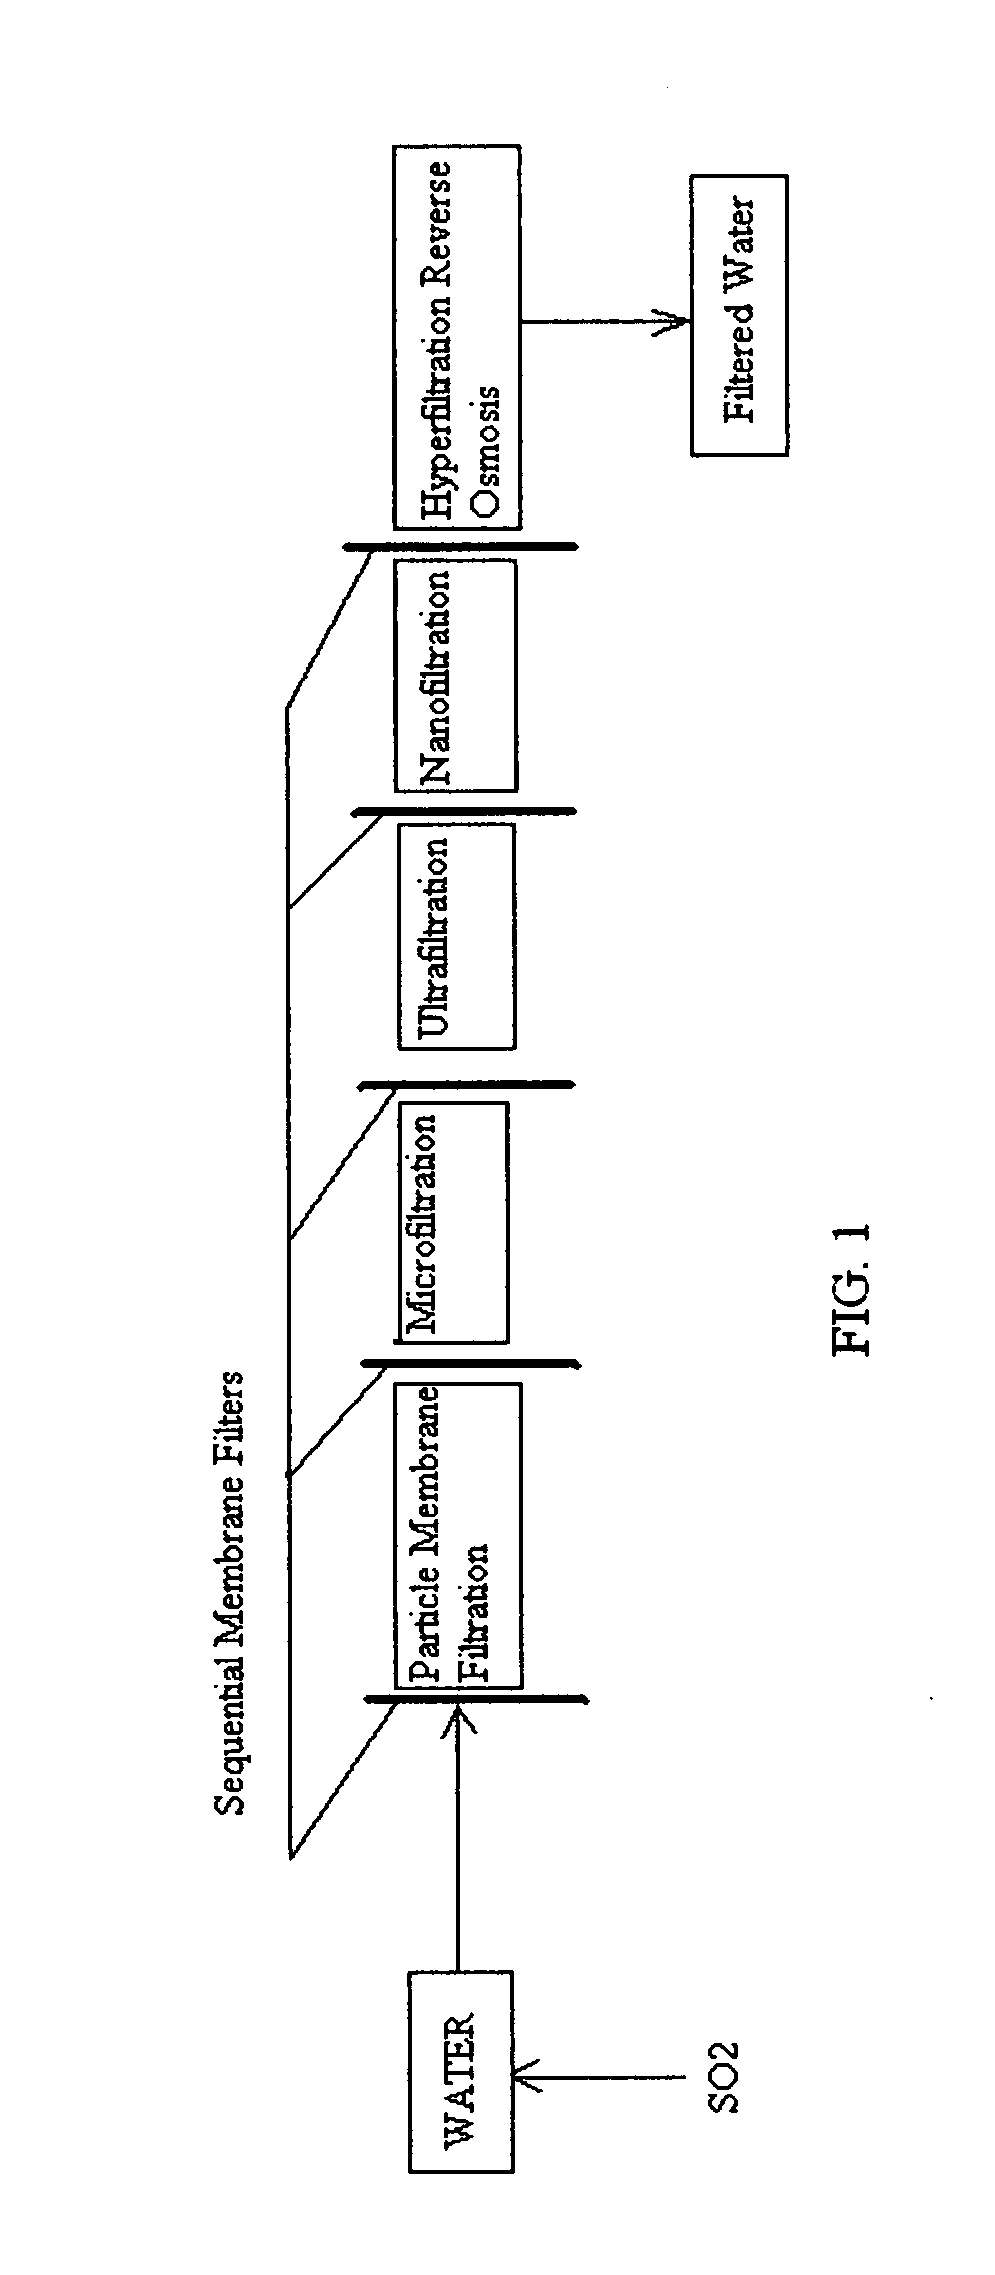 Treatment method for reverse osmosis filtration systems